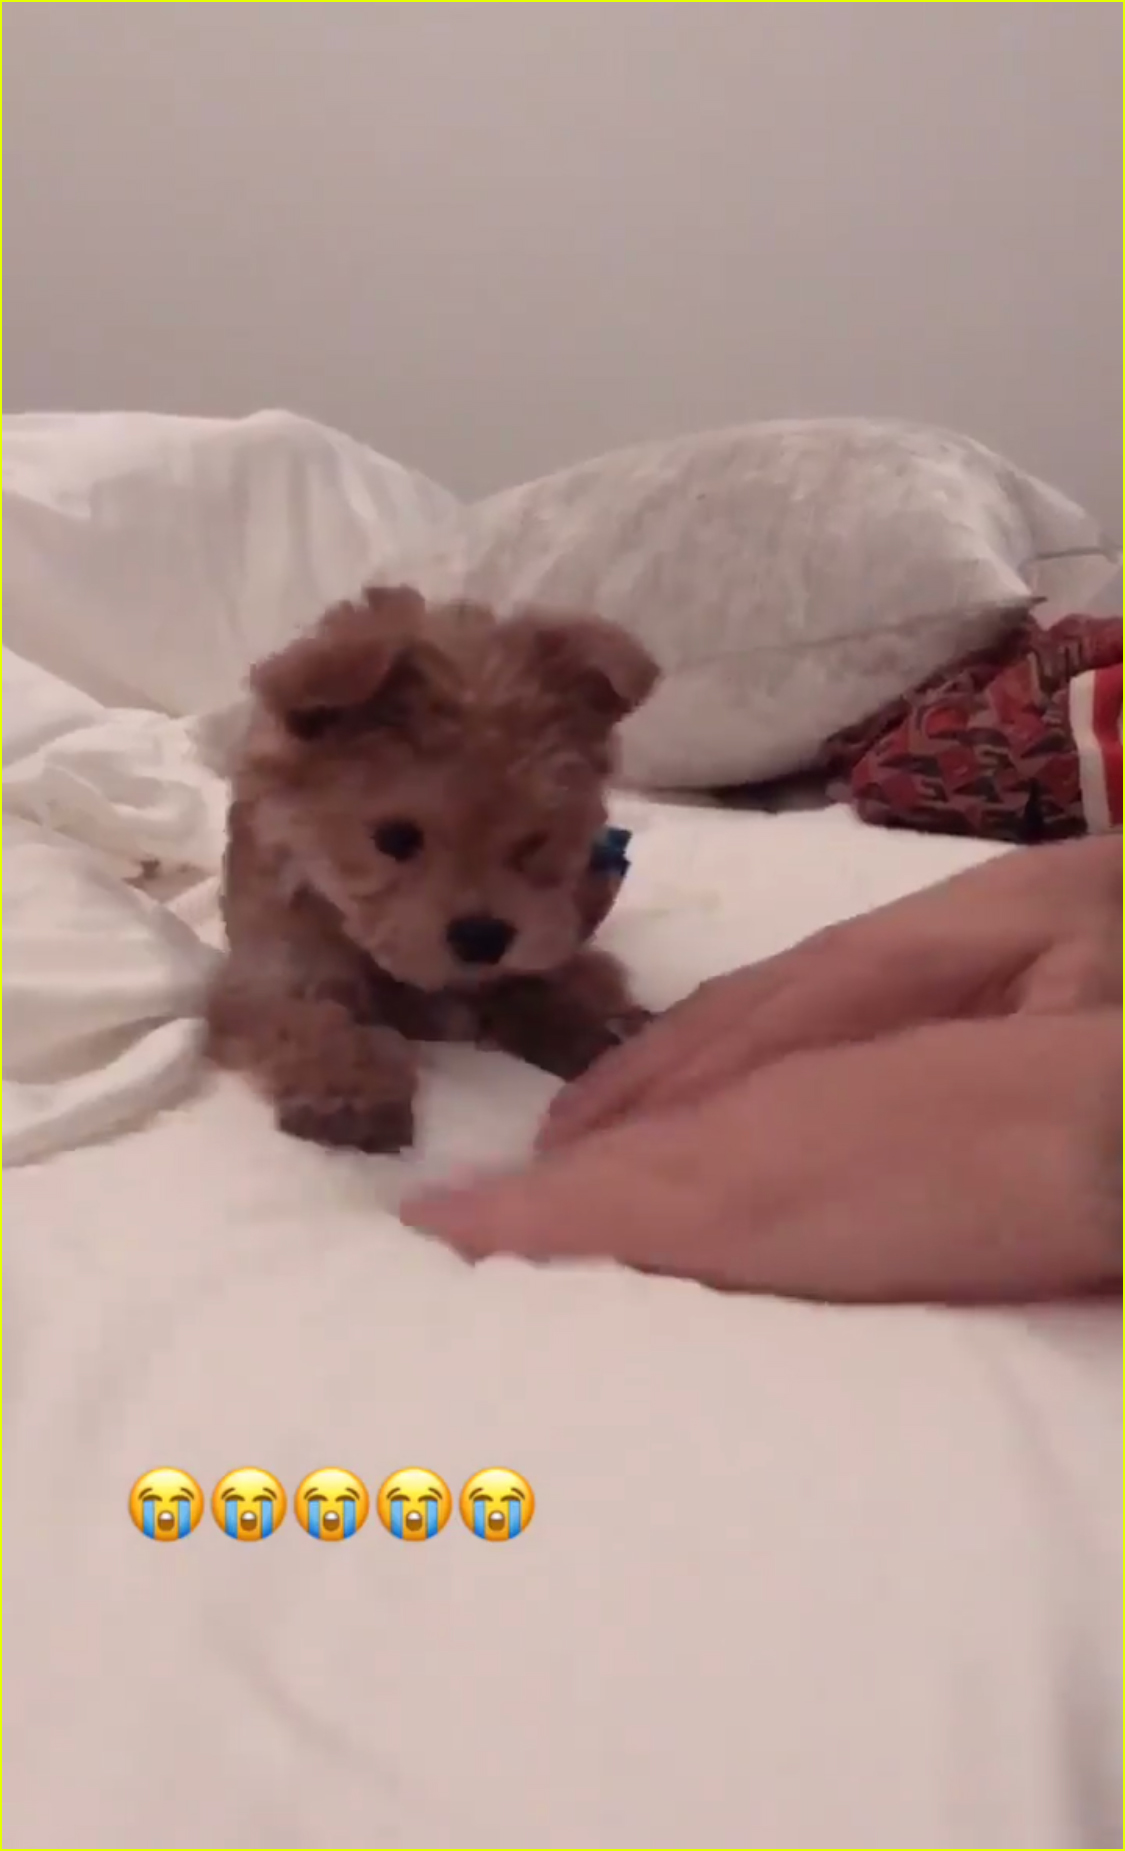 justin hailey bieber adopt adorable puppy for christmas 07